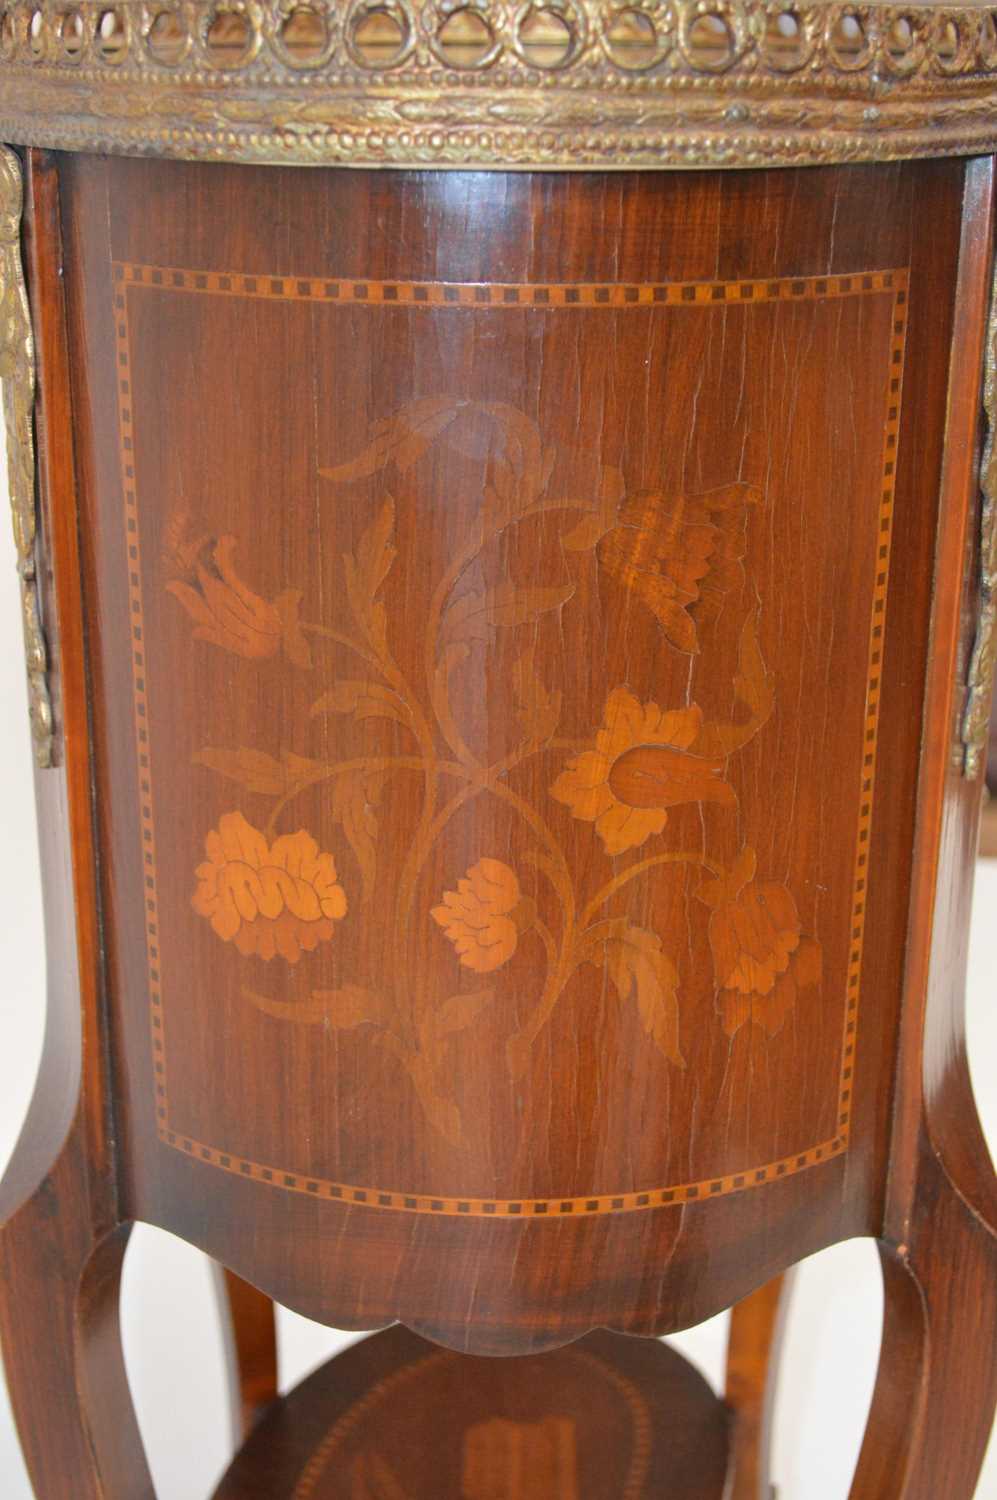 Late 19th Century Louis XV Style French Marquetry and Ormolu Mounted Side Table - Image 4 of 8